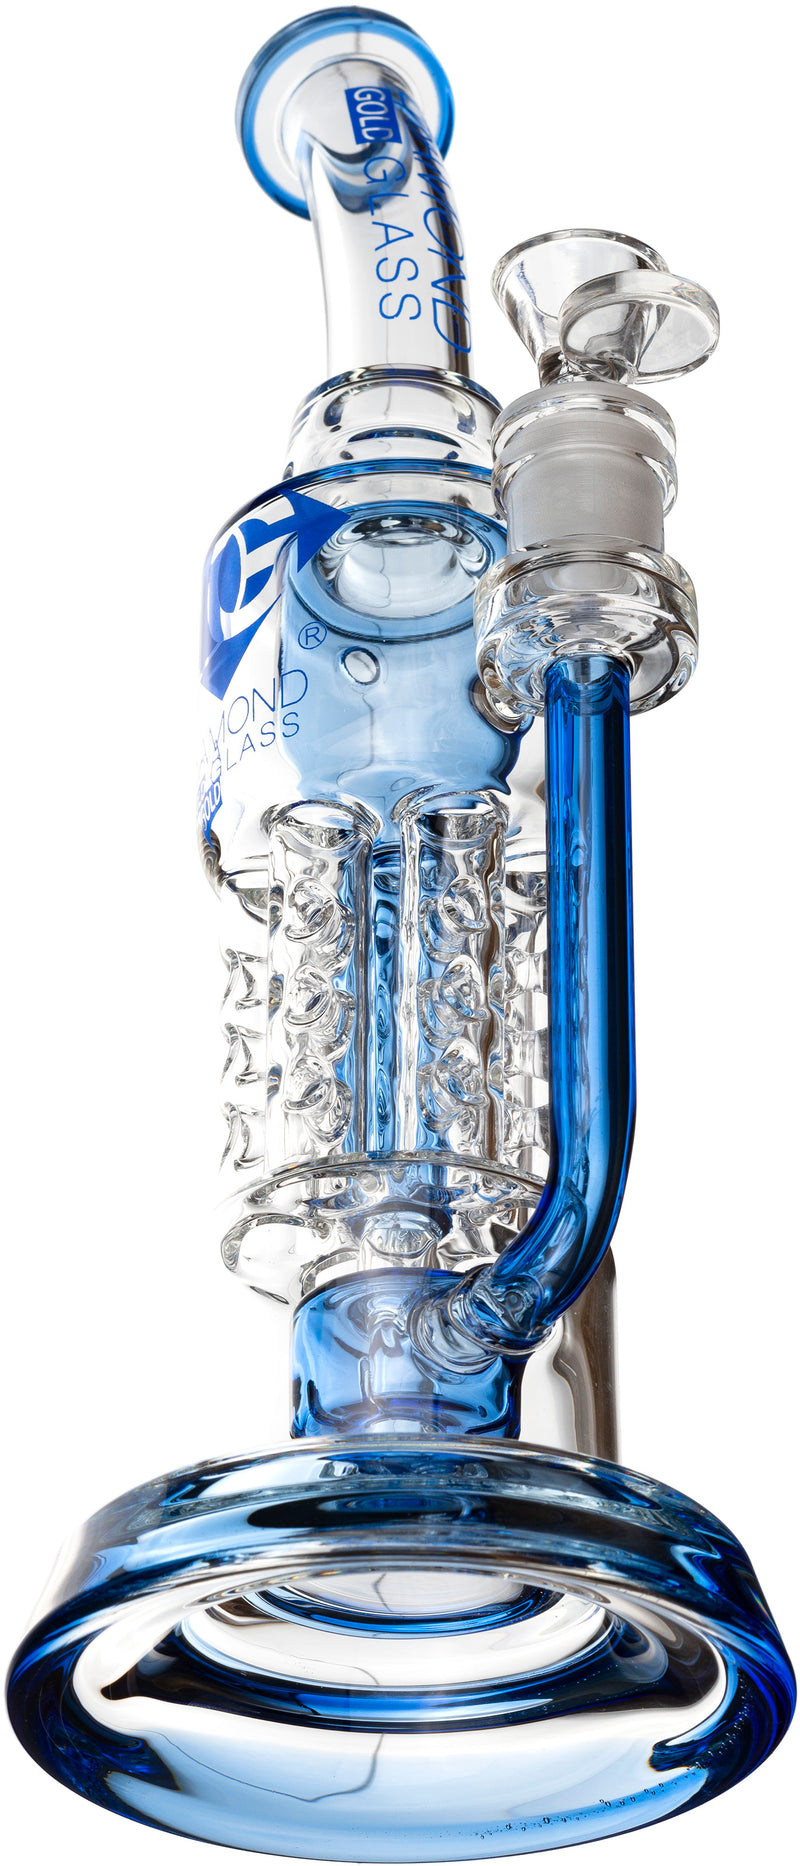 12” Incycler Swiss Pillar Perc Rig, by Diamond Glass (free banger included)